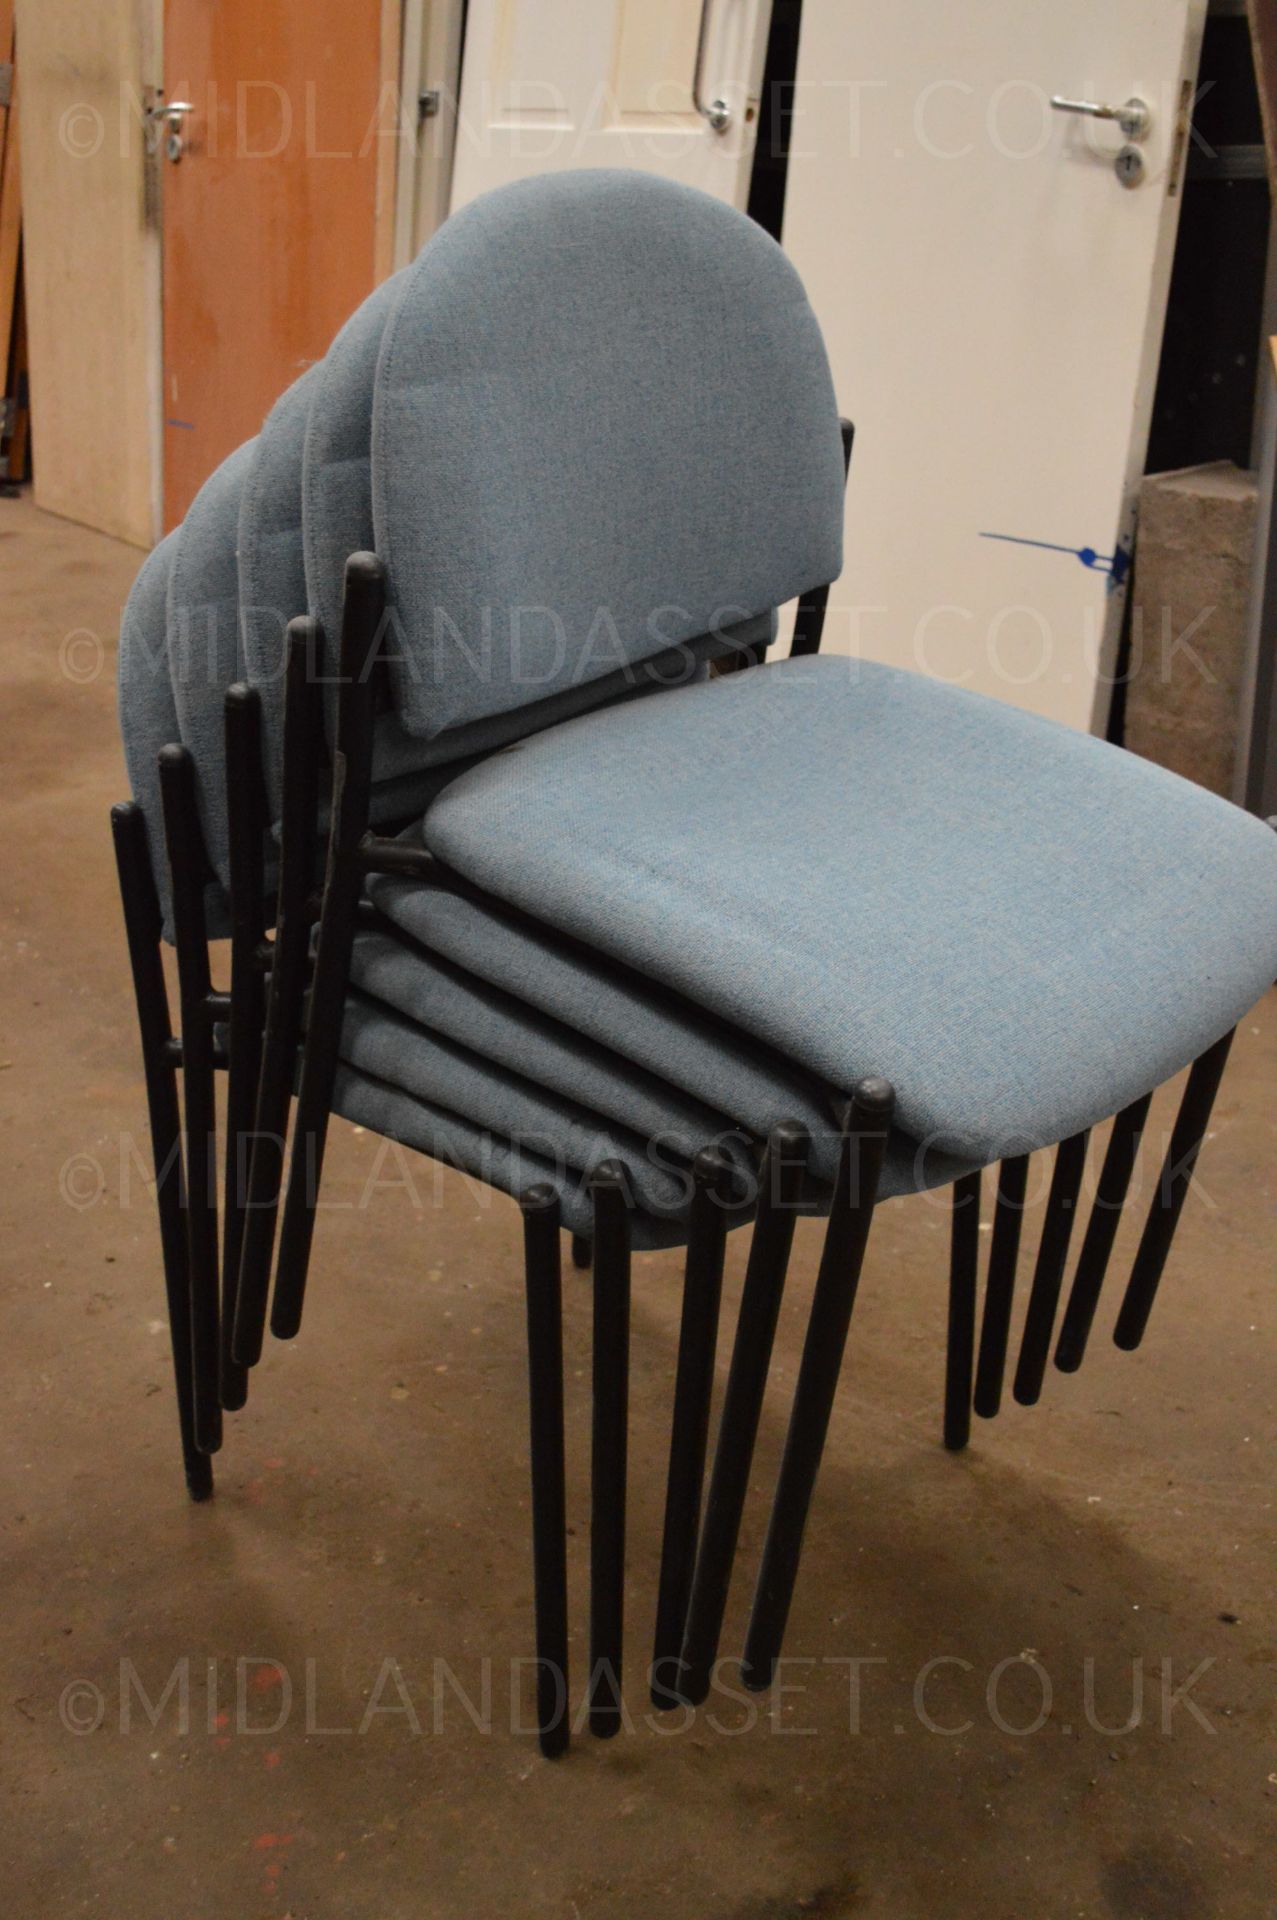 X5 BLUE CLOTH CHAIRS - USED CONDITION